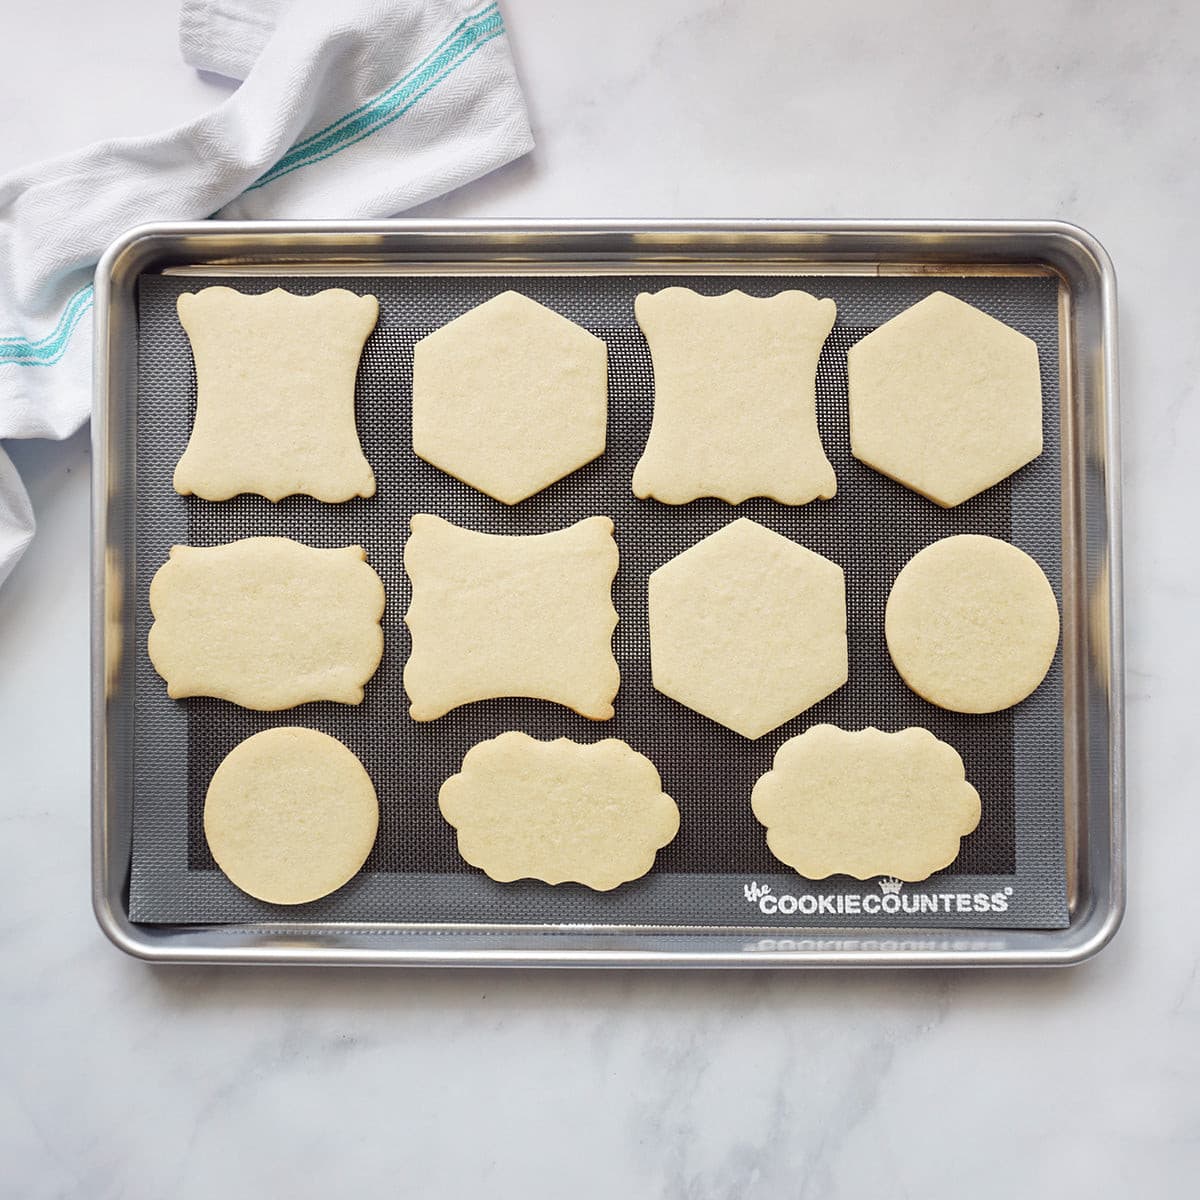 Perfect Cookie Baking Set w/ 2 Silicone Mats and Press - Alex by Dash